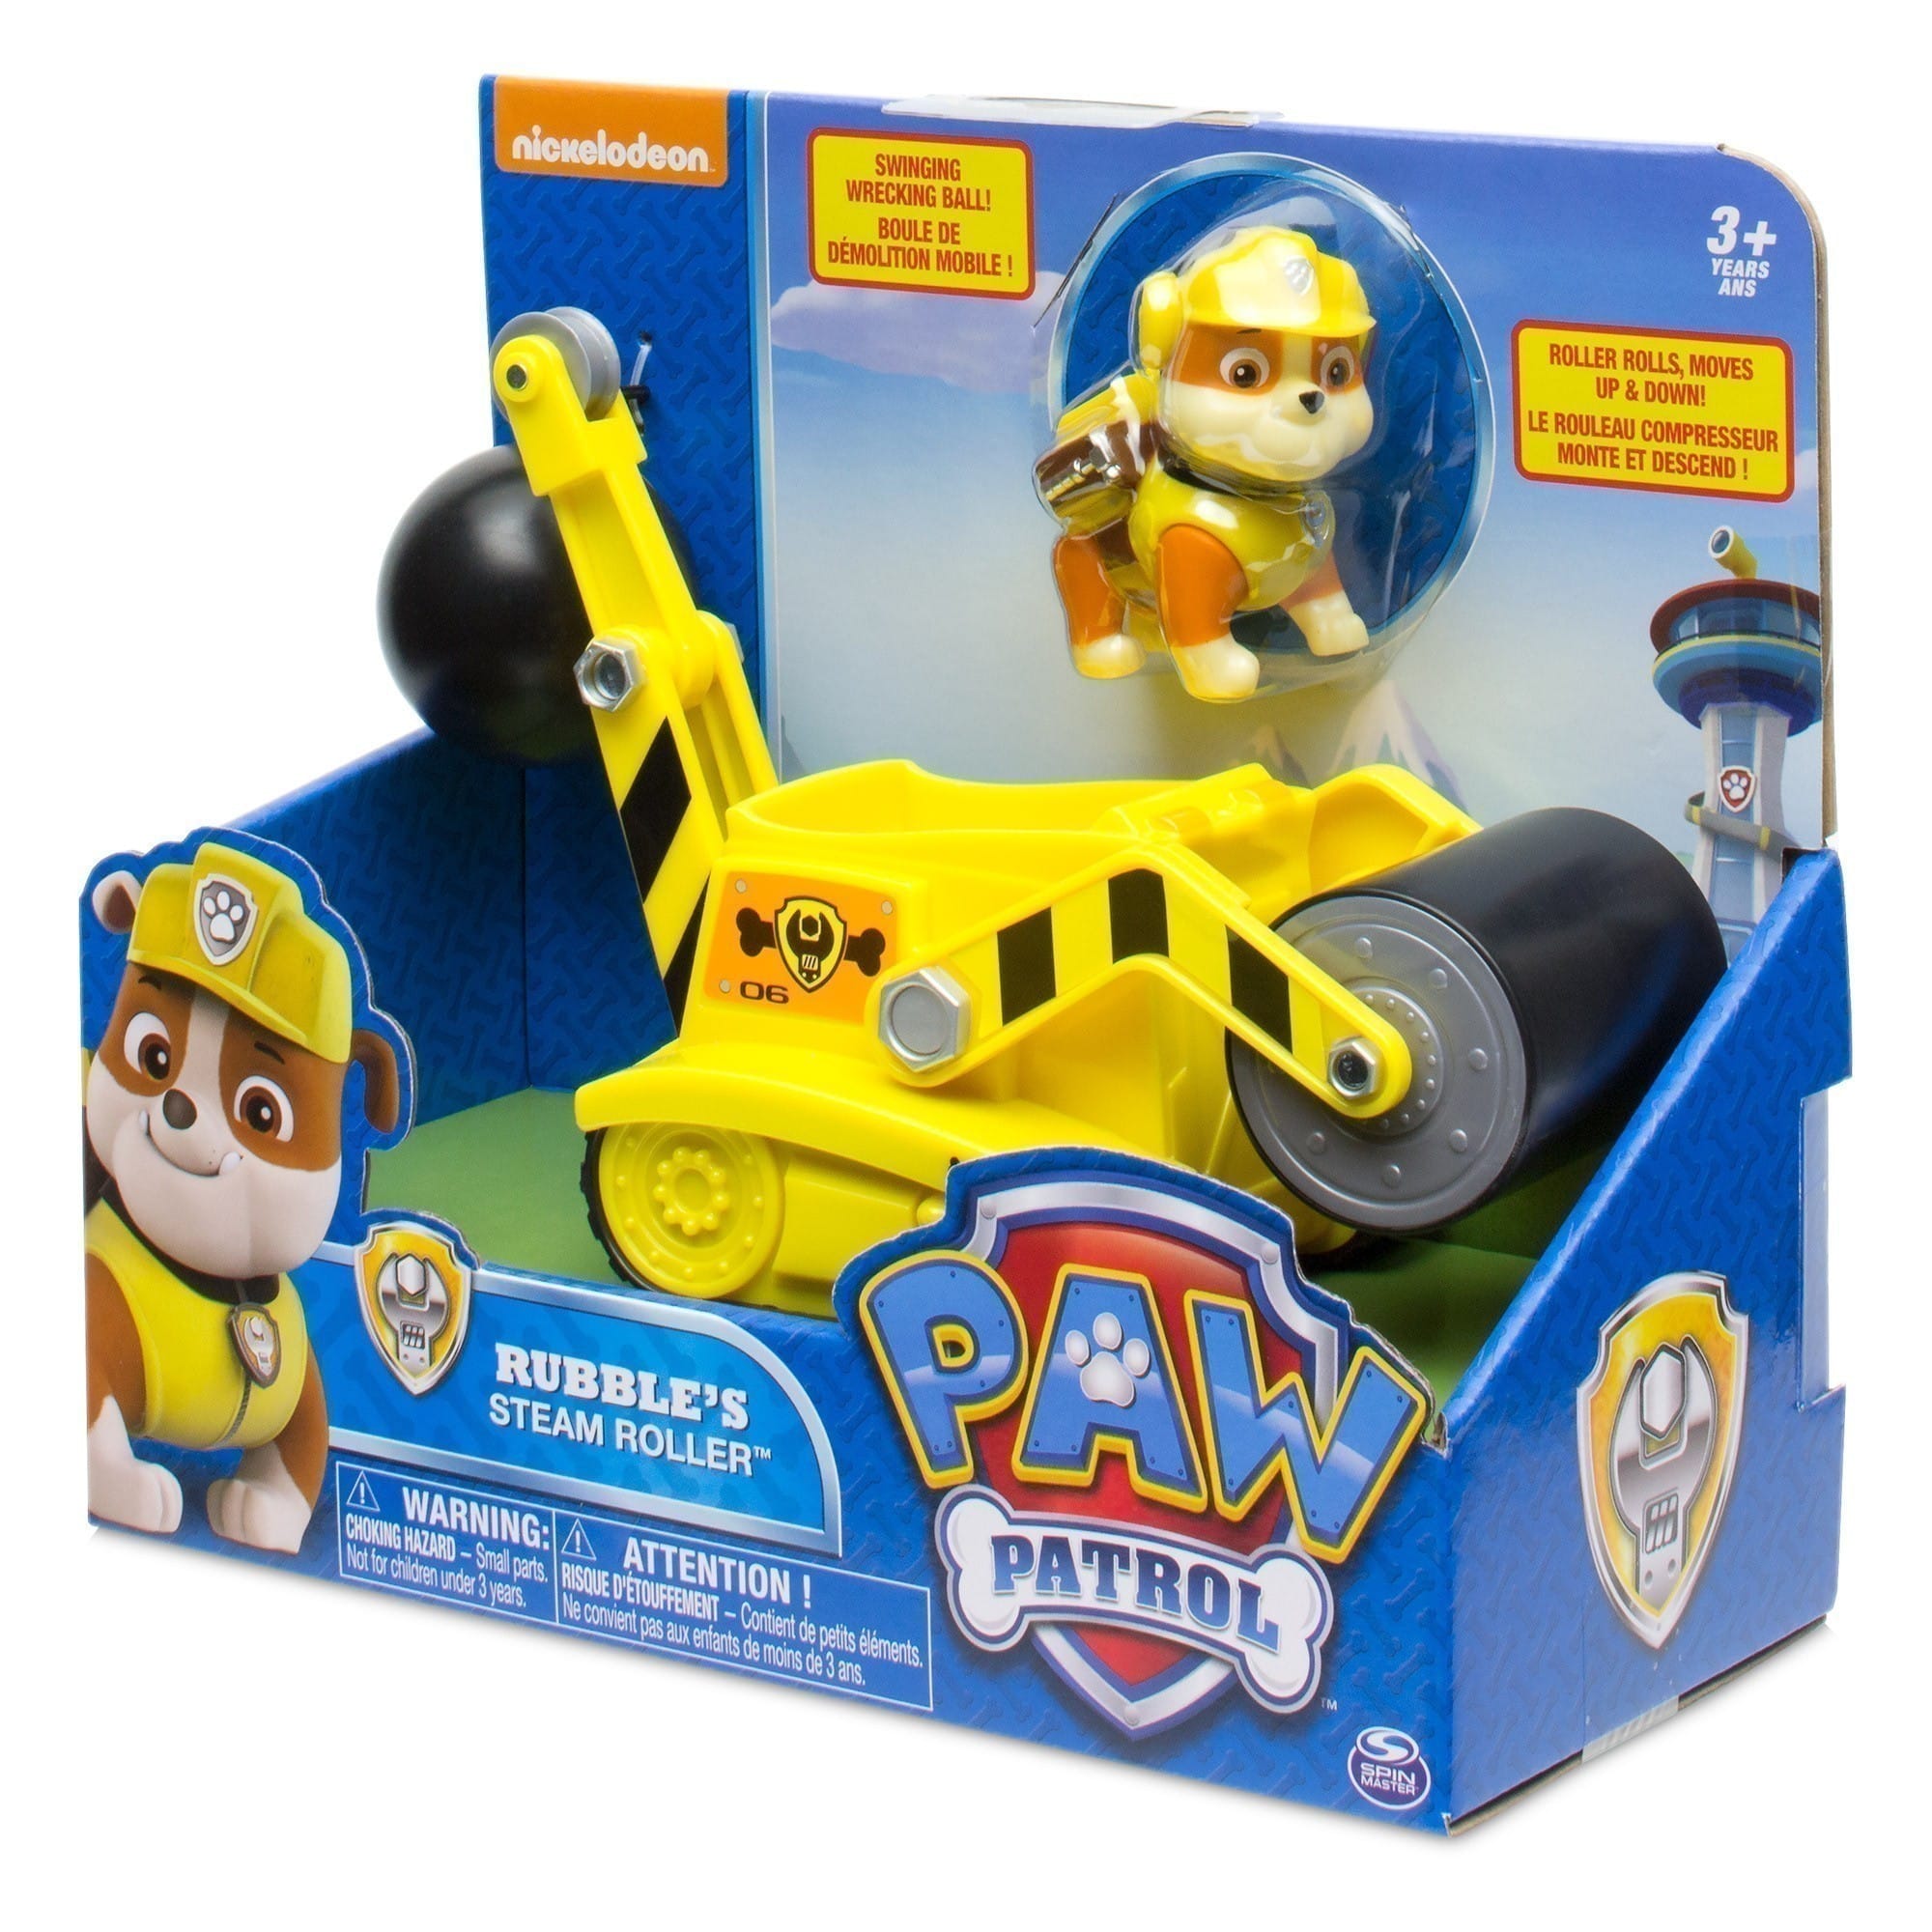 Nickelodeon - Paw Patrol - Rubble's Steam Roller